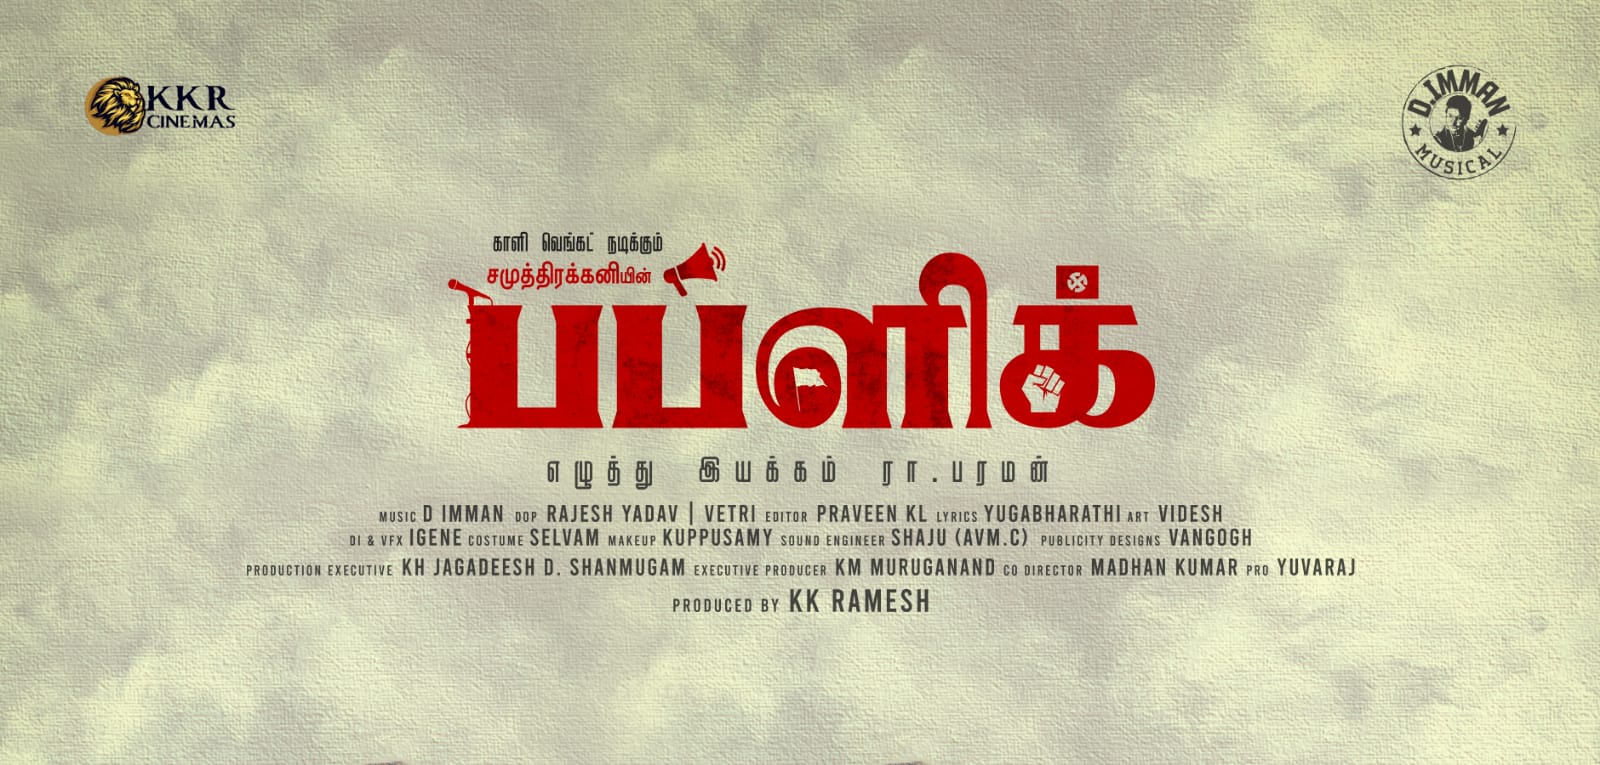 Samuthirakani Public Movie First Look Poster Released